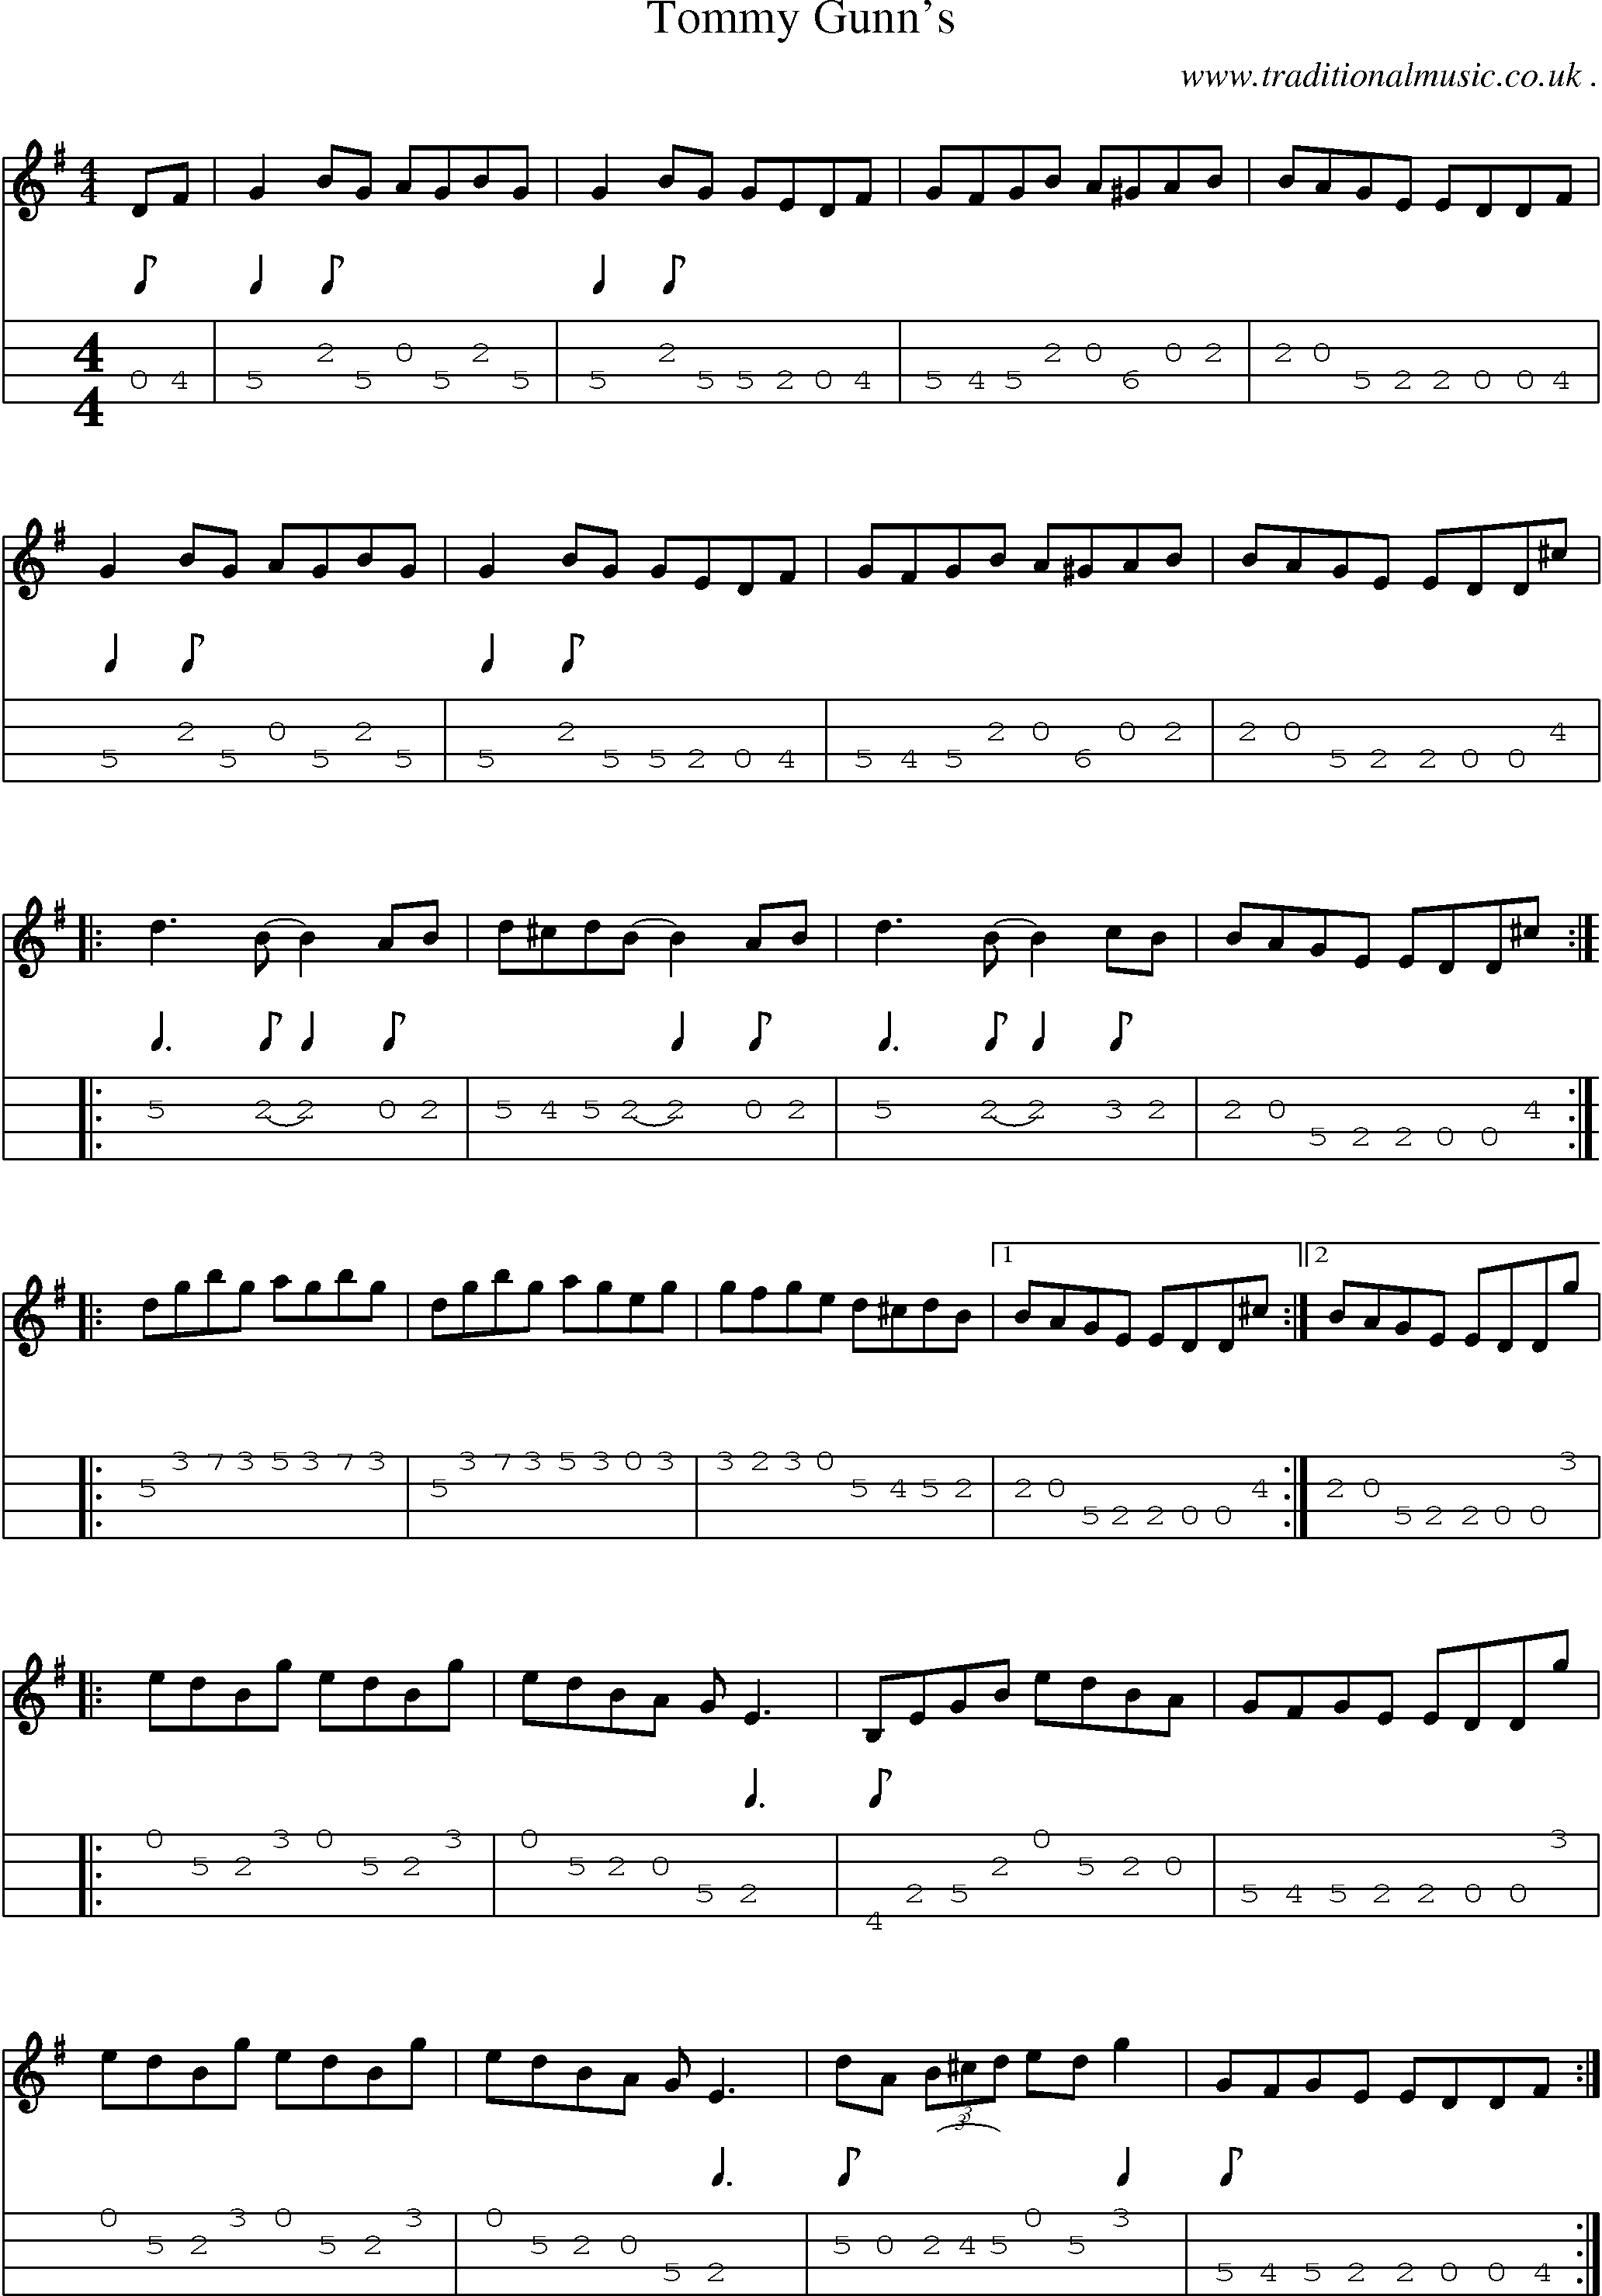 Sheet-Music and Mandolin Tabs for Tommy Gunns